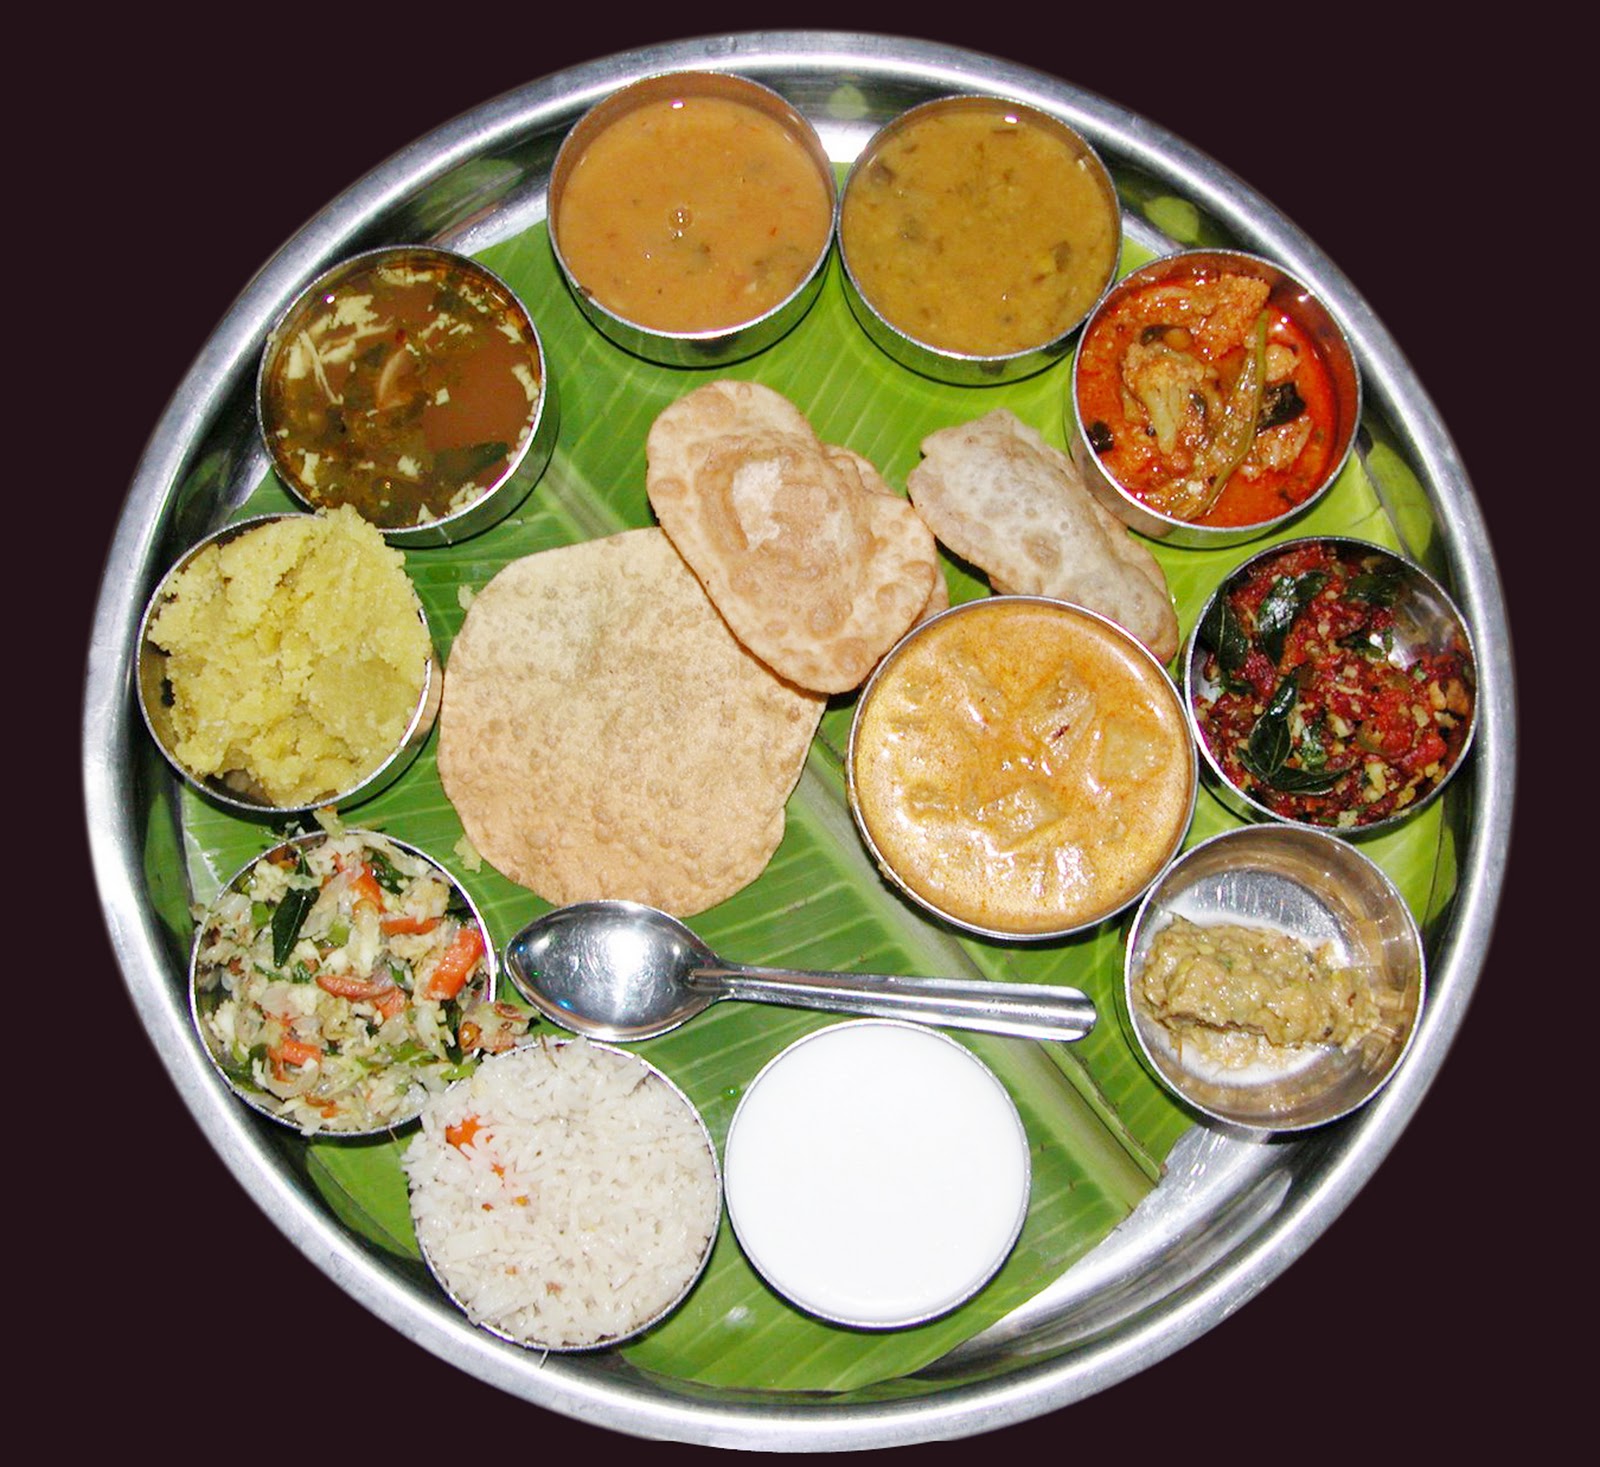 Albums 98+ Wallpaper Indian Food Pictures With Names Latest